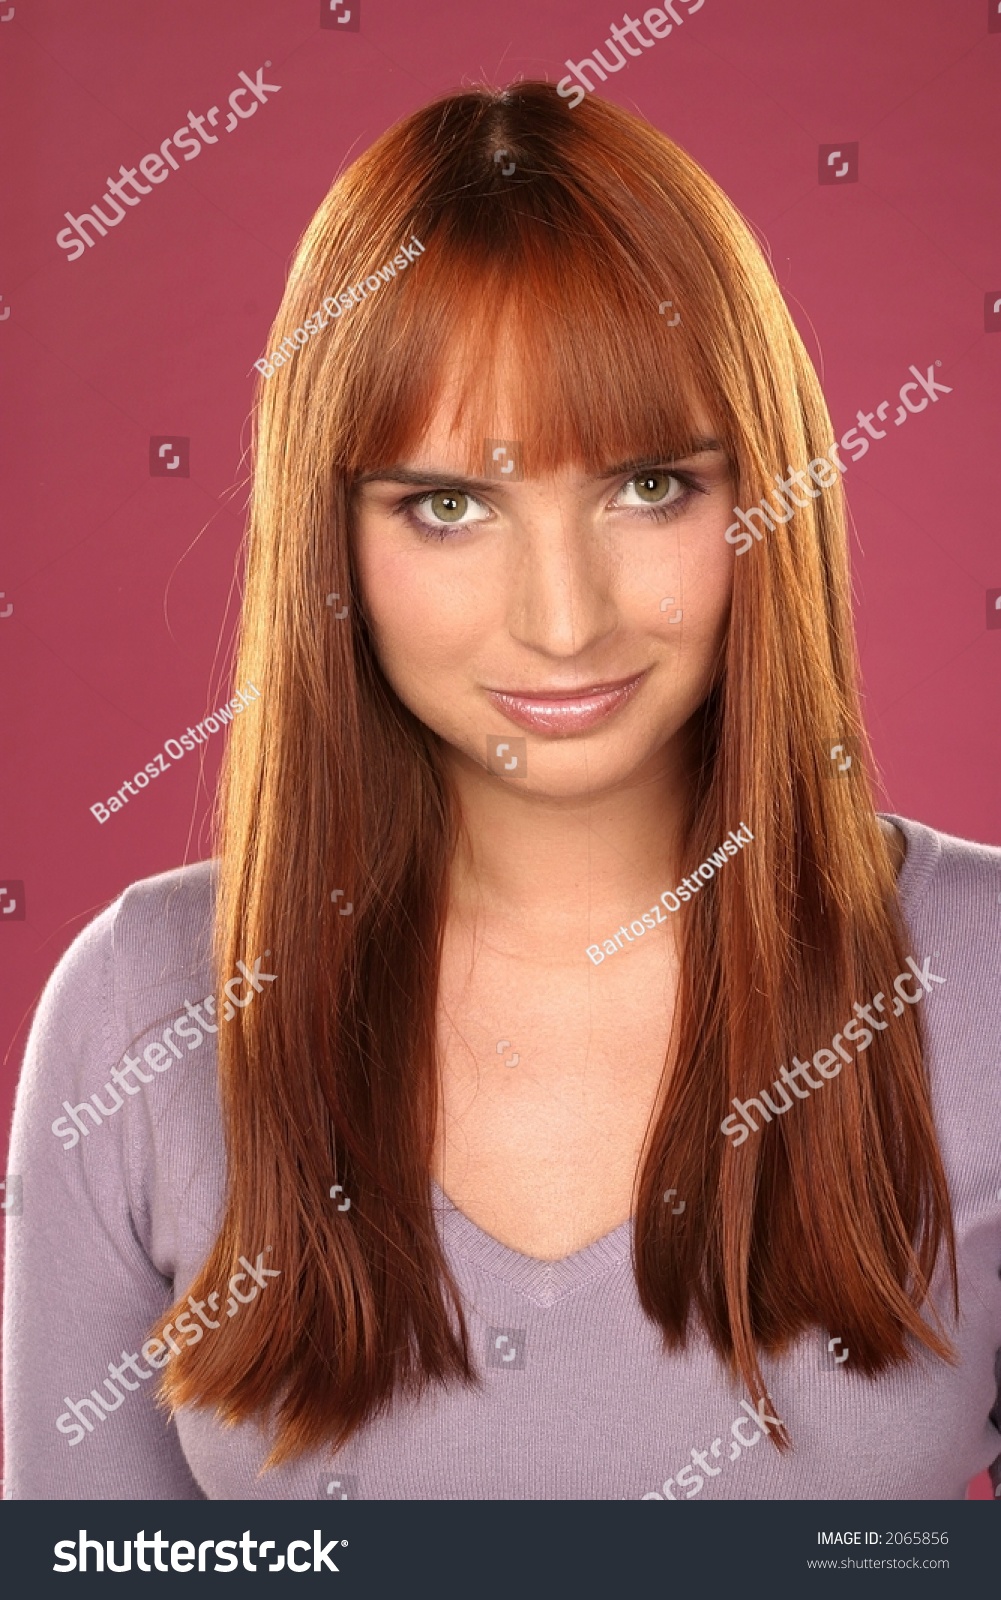 RedHaired Young Girl Woman In Lilac Top Stock Photo 2065